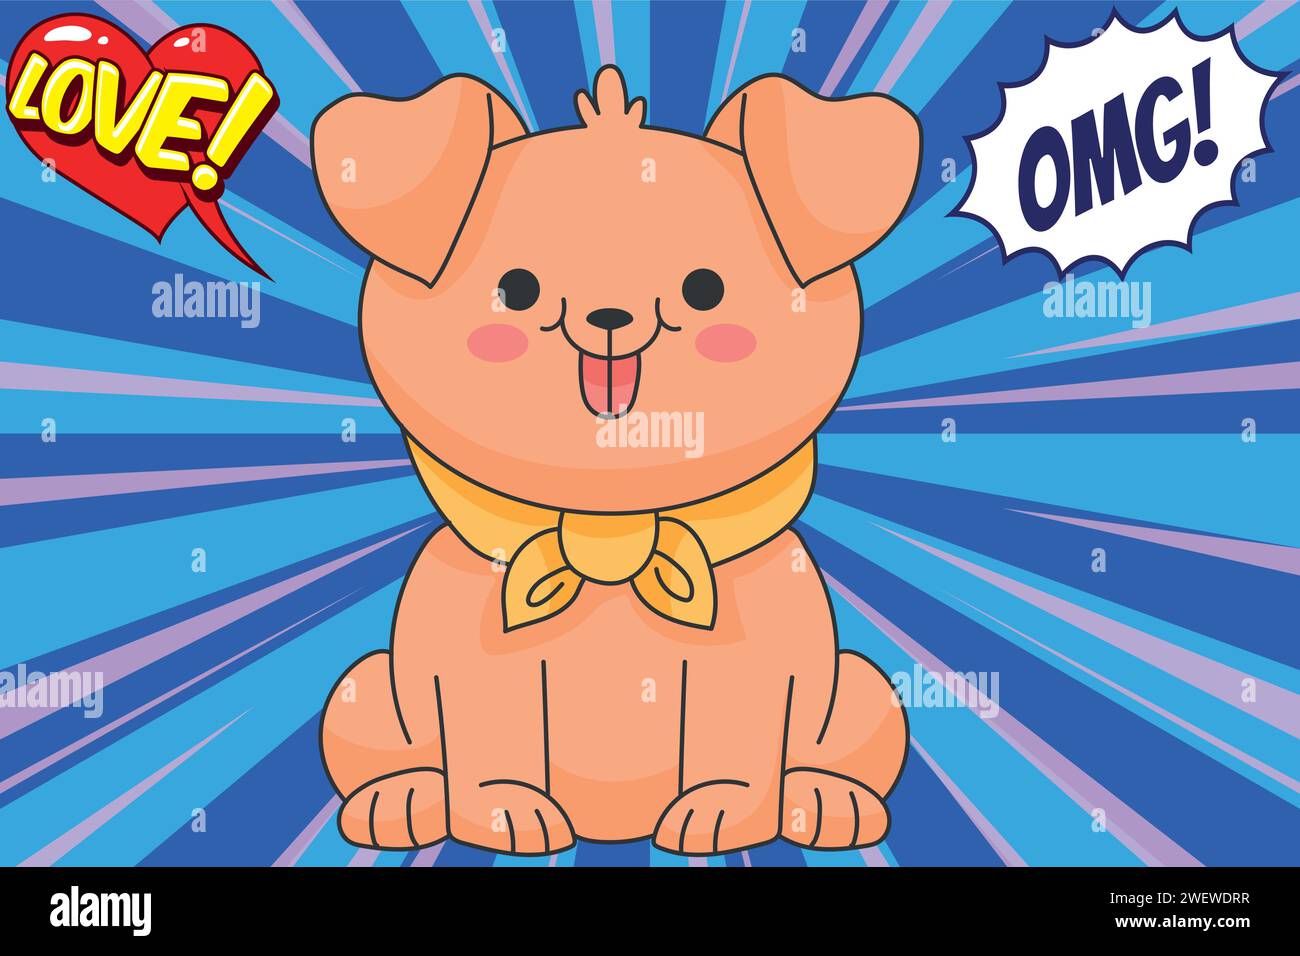 funny dog pop art style vector image Stock Vector